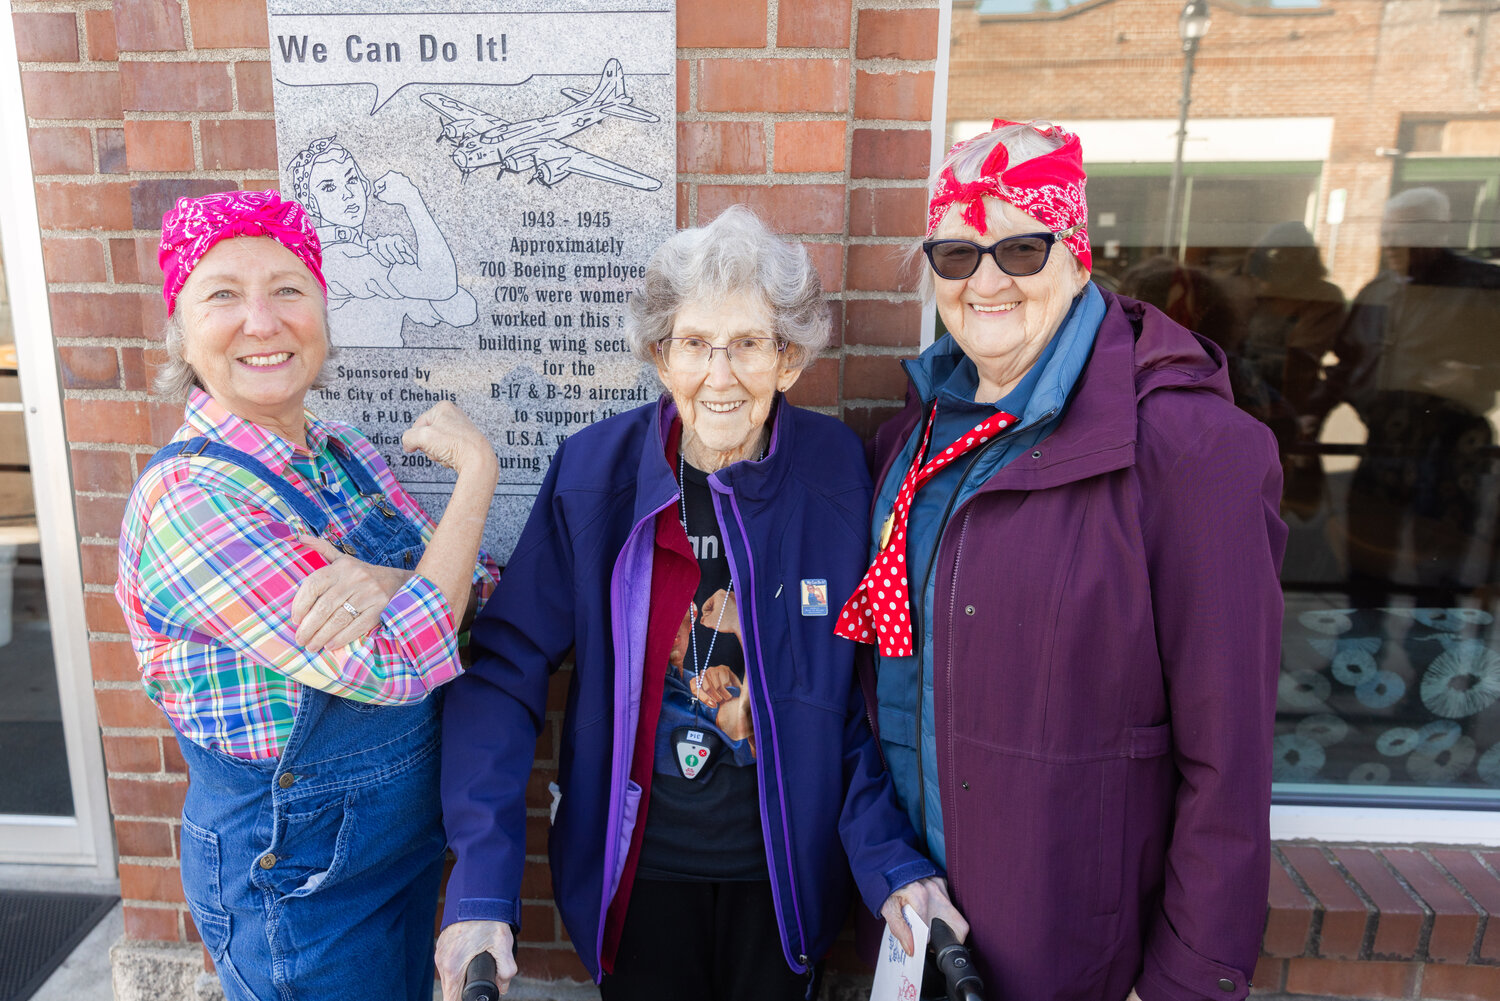 Marie Panesko, Doris Bier and Edna Fund smile for a photo on Thursday in front of a “Rosie The Riveter” plaque honoring Boeing employees who crafted wing sections for the B-17 and B-29 aircraft during World War II. The plaque is on display in Chehalis outside the Lewis County Public Utility District building.